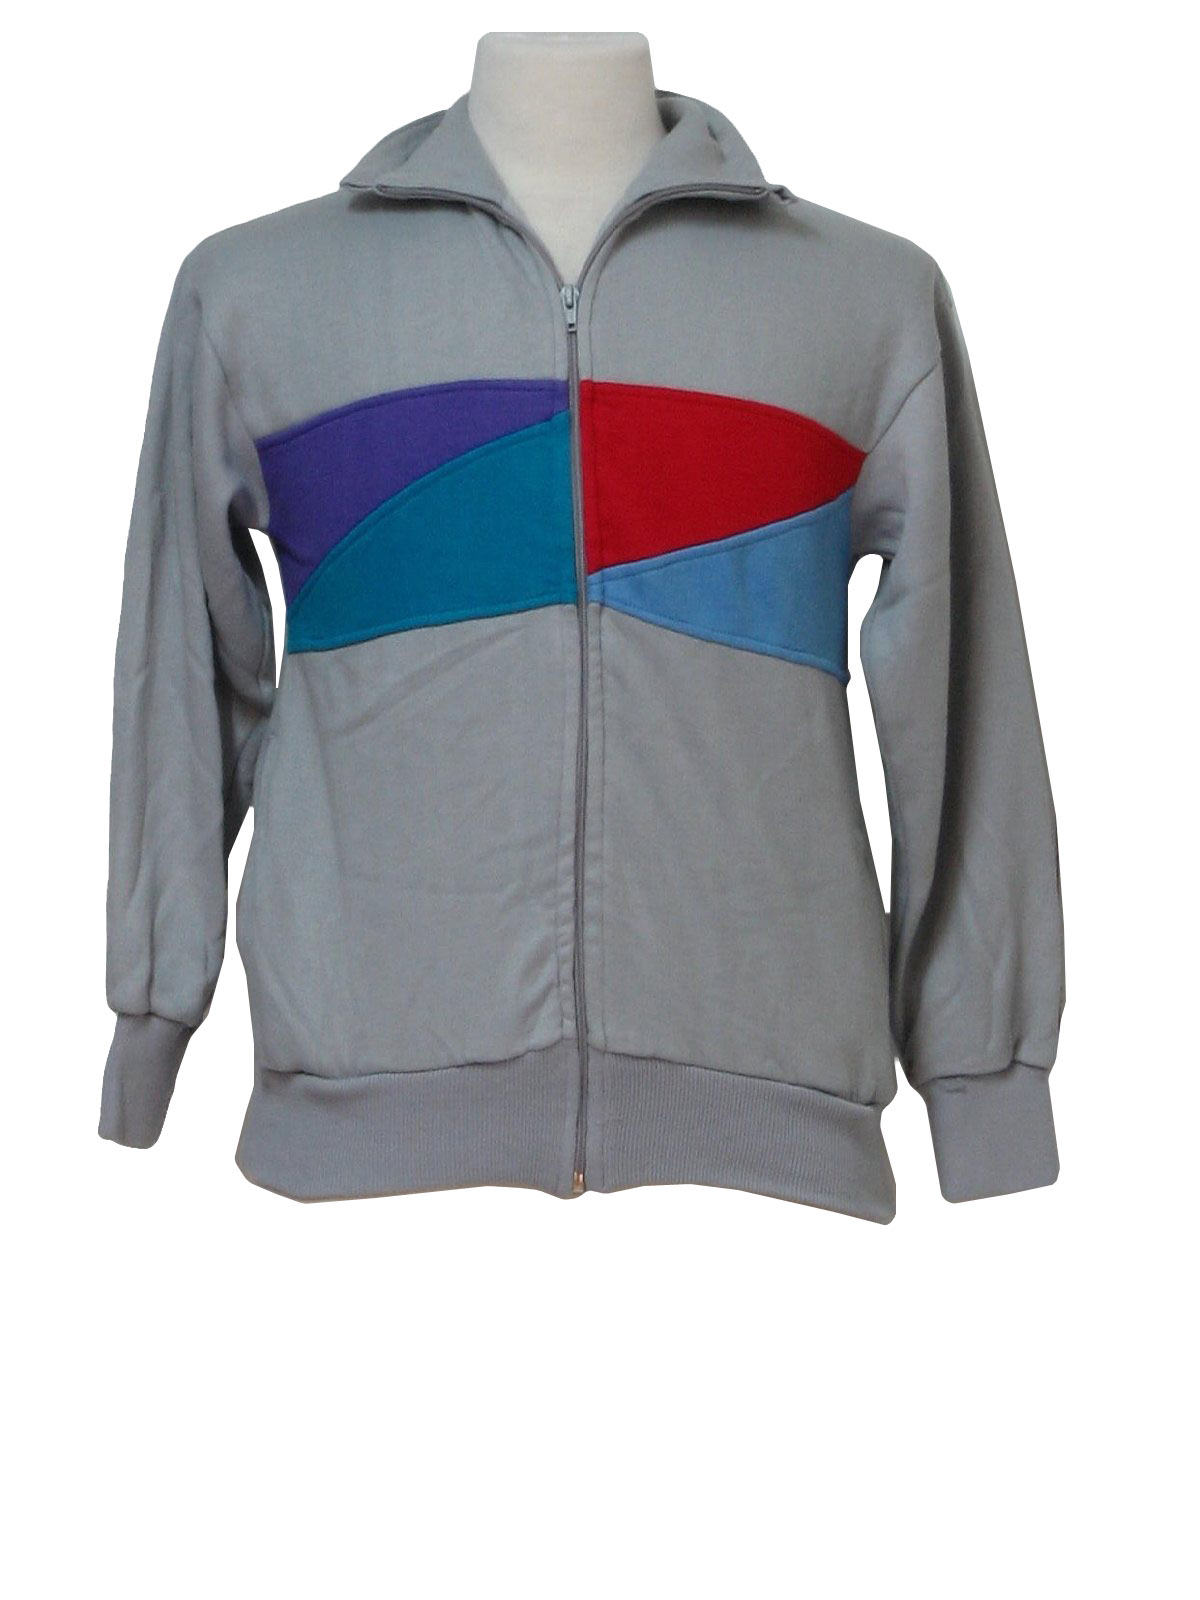 80s Jacket (Sportswear): 80s -Sportswear- Mens grey, blue, red, teal and  violet totally 80s color block print acrylic zip front longsleeve track  jacket with fold over collar, two lower inset pockets and